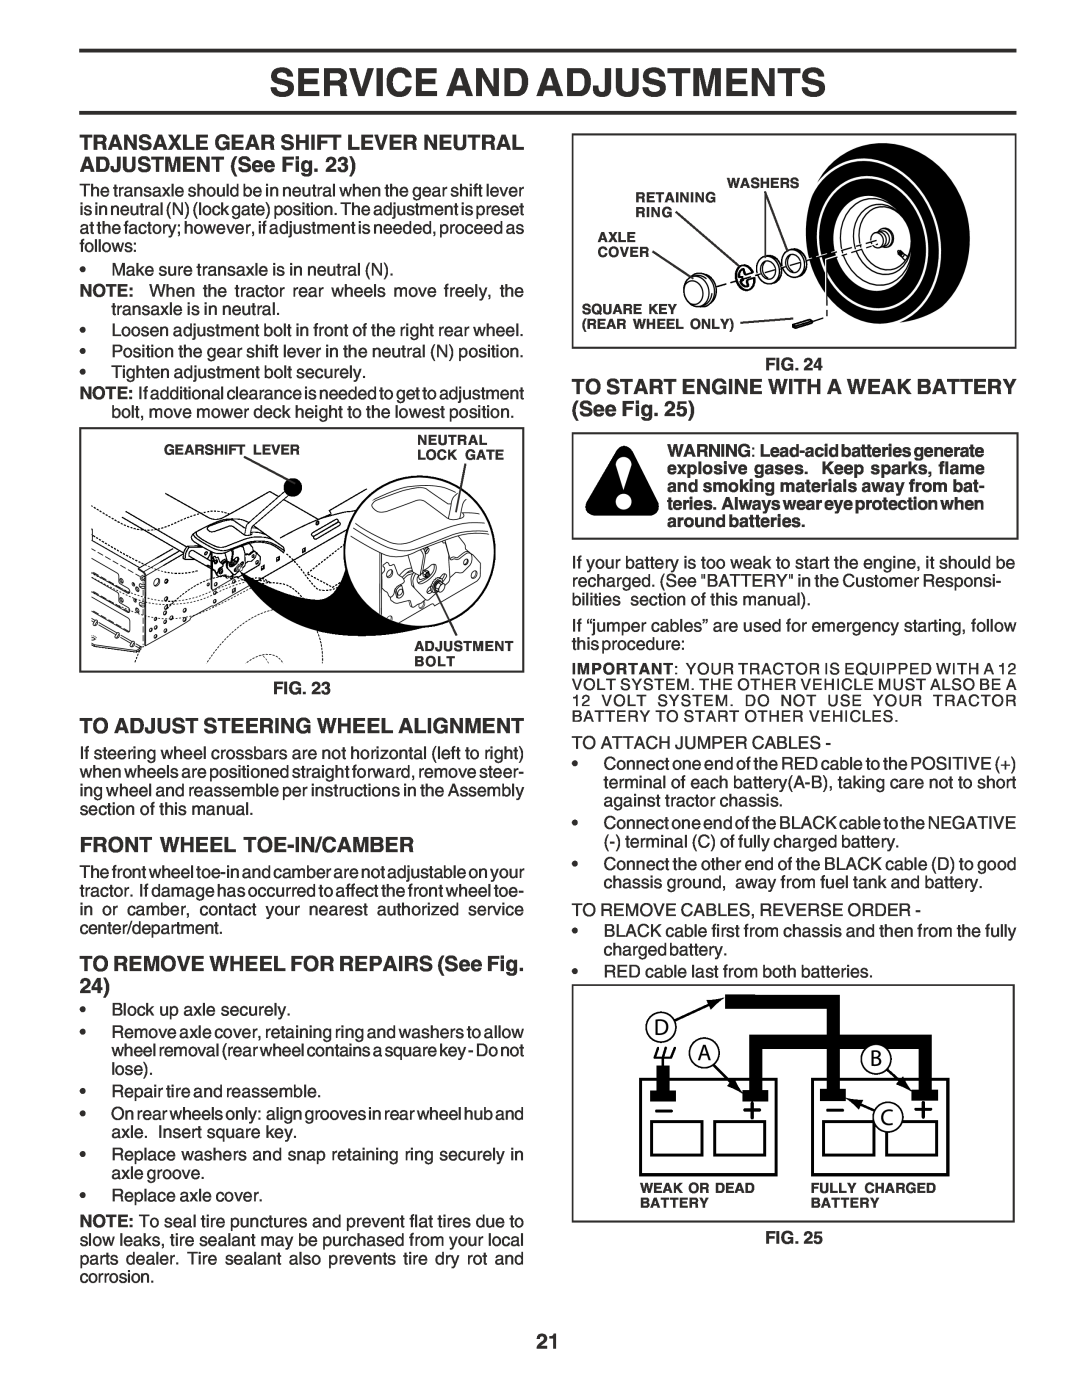 Poulan PR17542STC owner manual TRANSAXLE GEAR SHIFT LEVER NEUTRAL ADJUSTMENT See Fig, To Adjust Steering Wheel Alignment 